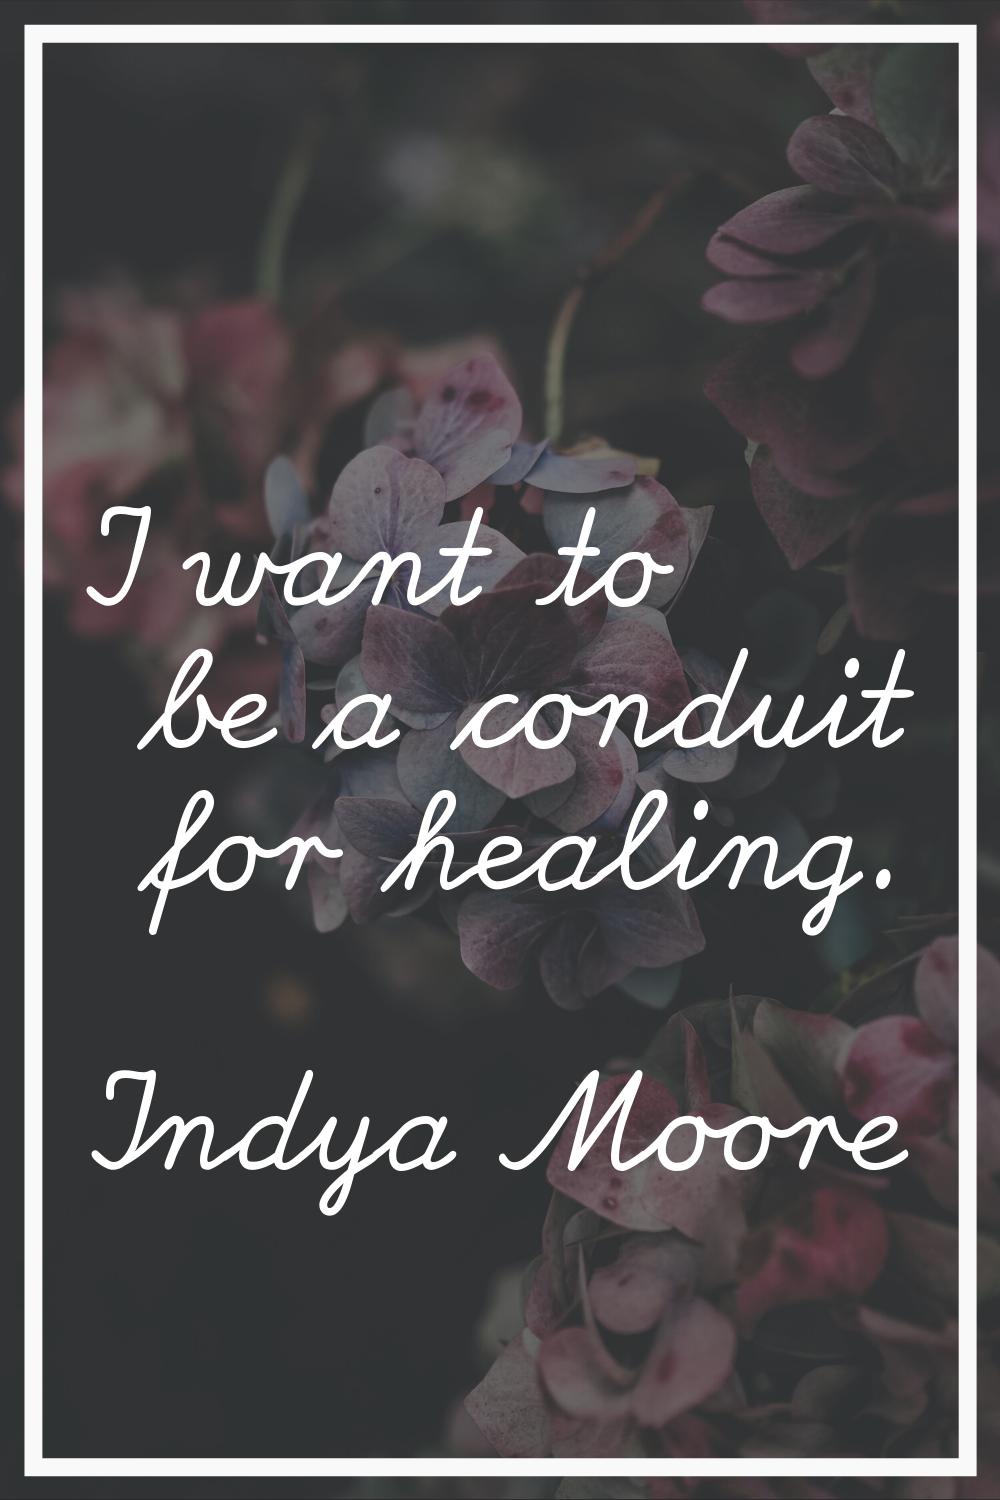 I want to be a conduit for healing.